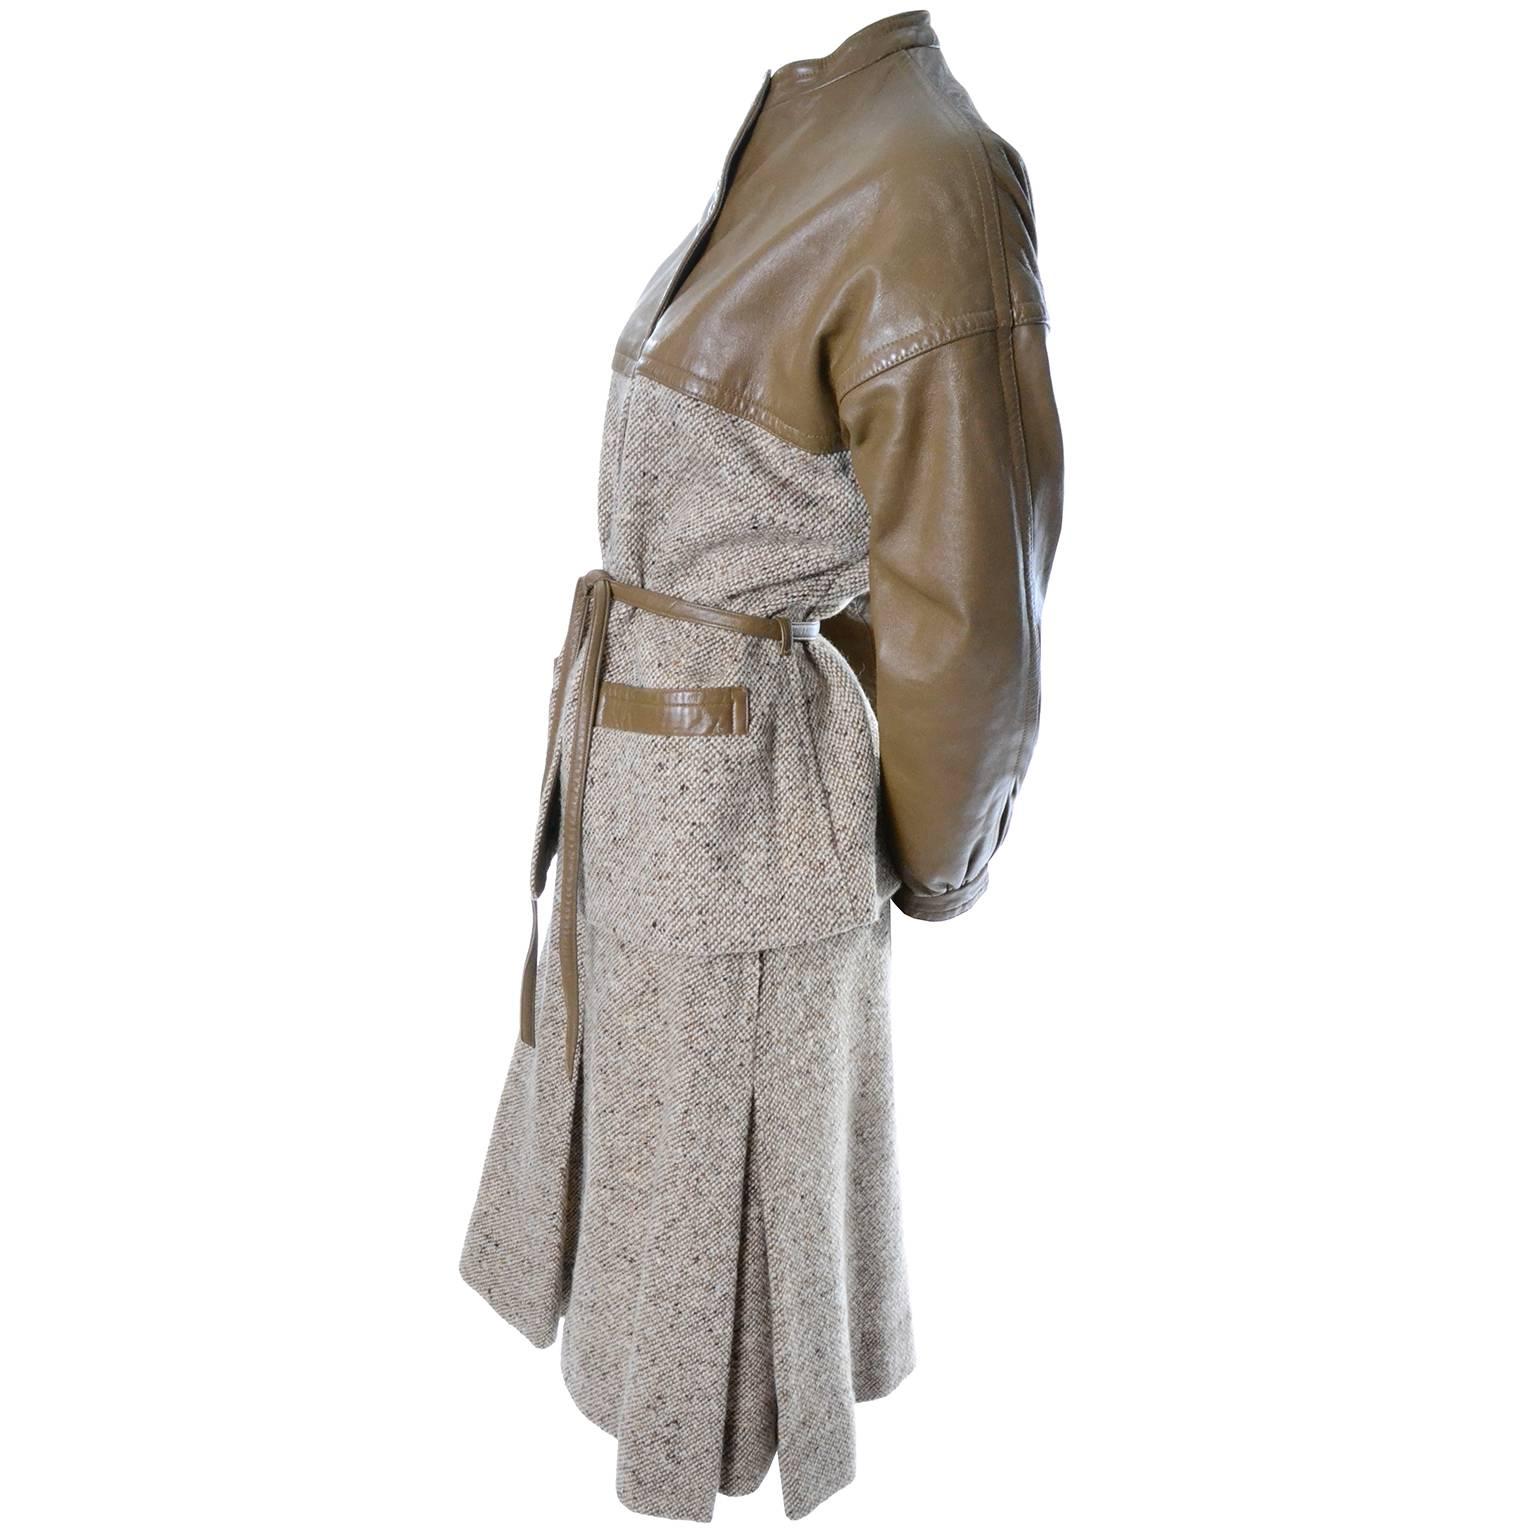 This Bonnie Cashin skirt suit is made of a tan brown tweed and is trimmed in tan leather.  The skirt has single pleat on each side and in front and back, leather trim at the waist band,and a side zipper.  The jacket snaps closed and has leather